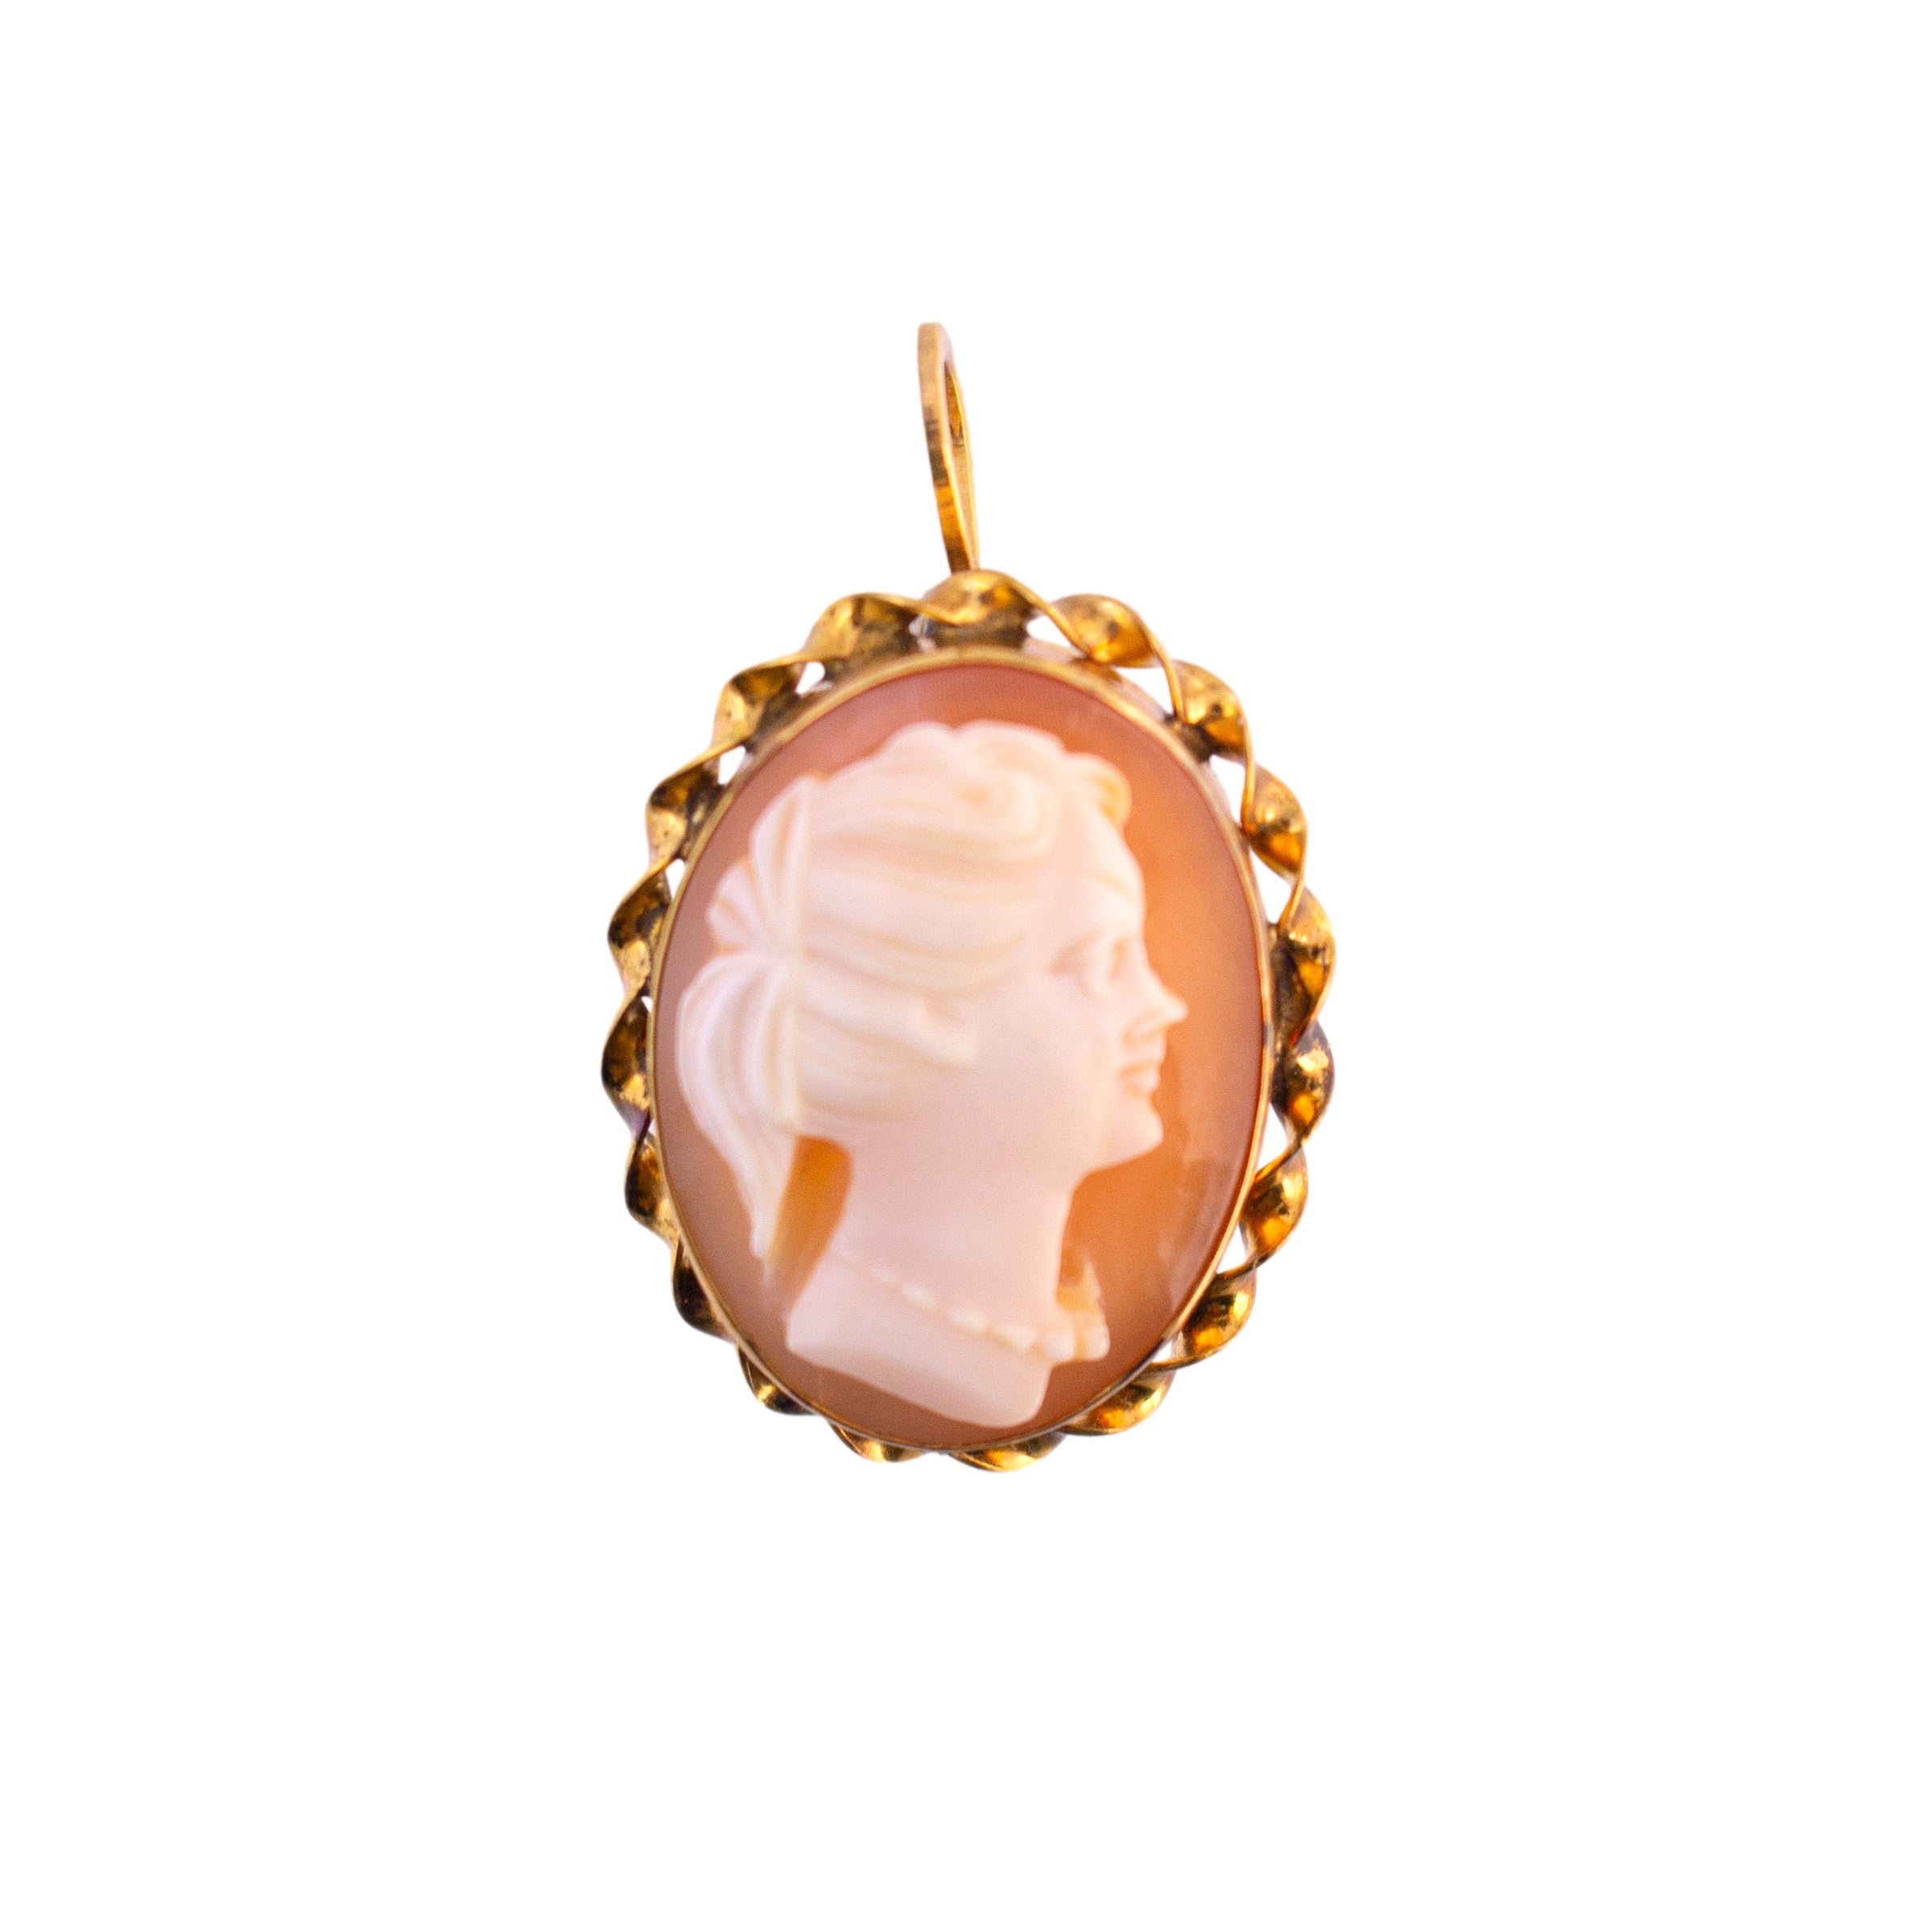 Gold Filled Cameo Pin/Pendant